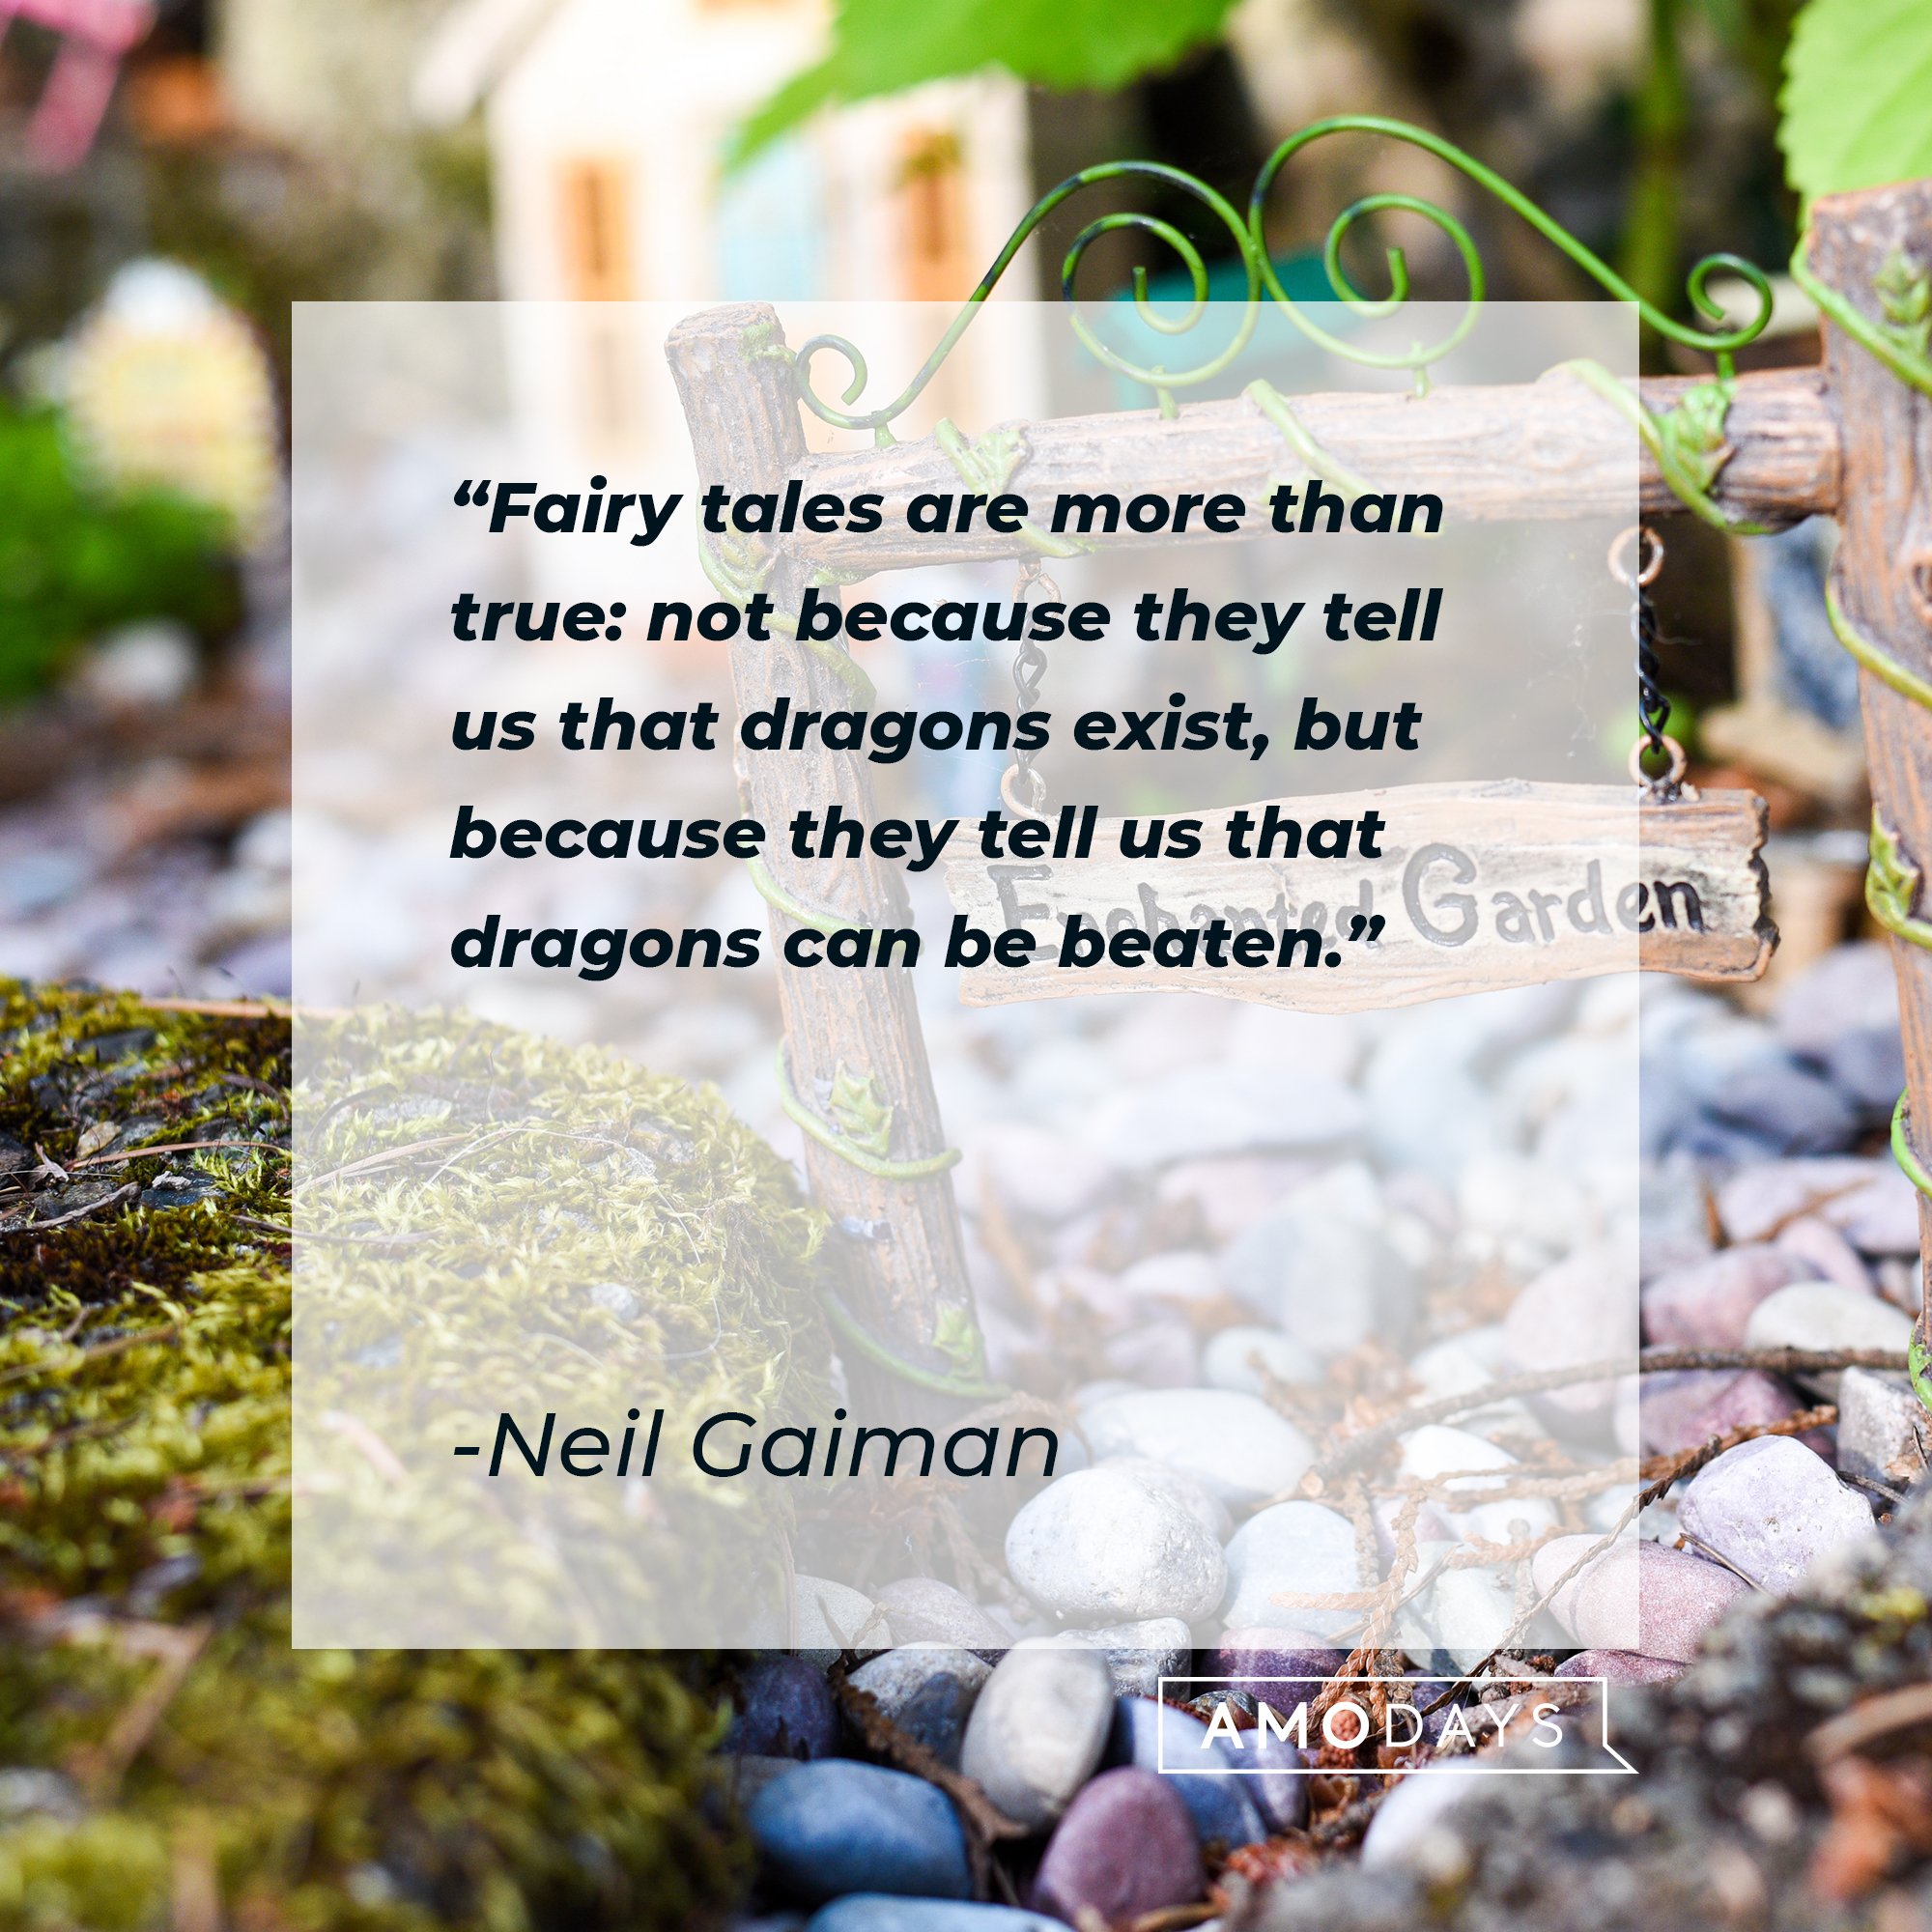 Neil Gaiman’s quote: "Fairy tales are more than true: not because they tell us that dragons exist, but because they tell us that dragons can be beaten." | Image: AmoDays